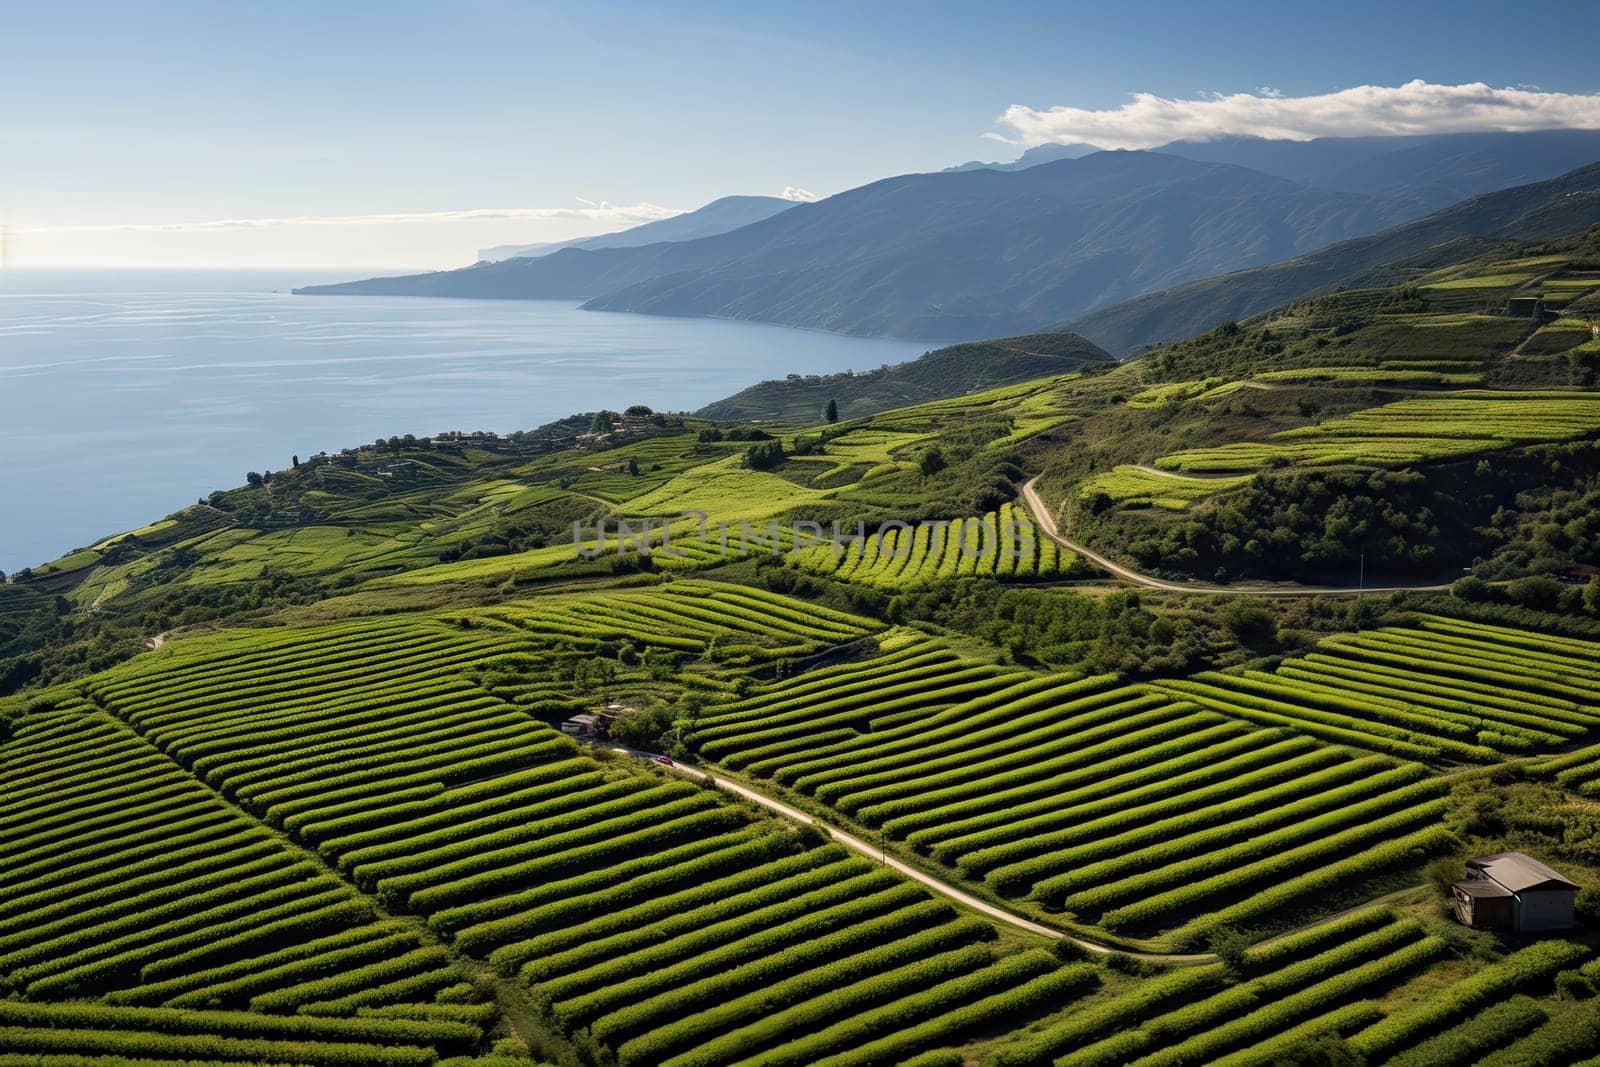 a beautiful view of the ocean and mountains from a hill top with rows of green tea plants growing on it